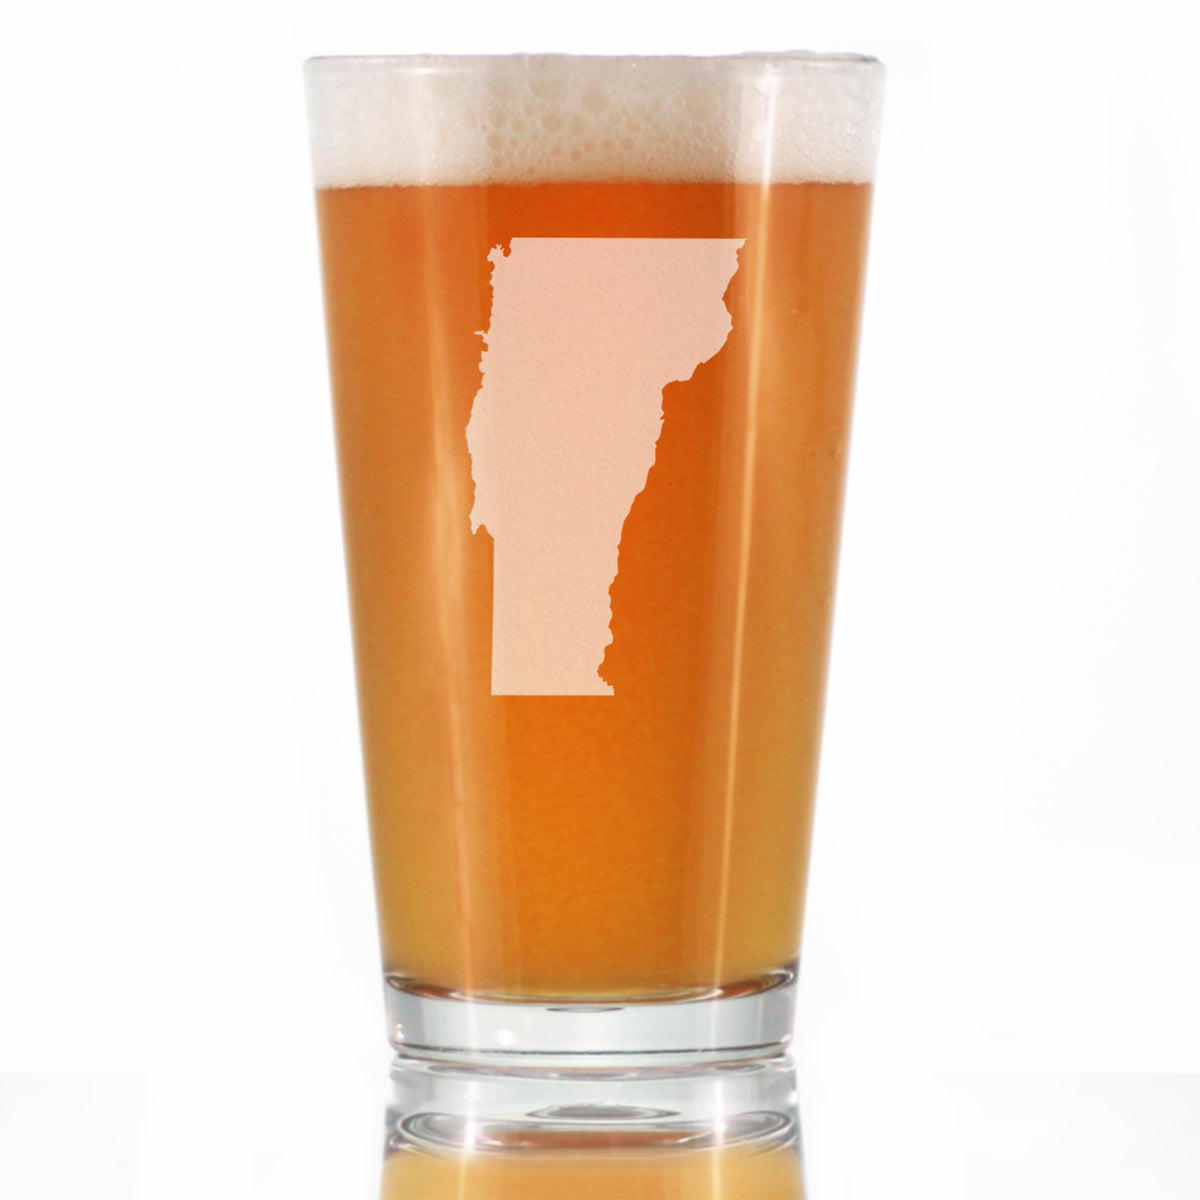 Vermont State Outline Pint Glass for Beer - State Themed Drinking Decor and Gifts for Vermonter Women &amp; Men - 16 Oz Glasses